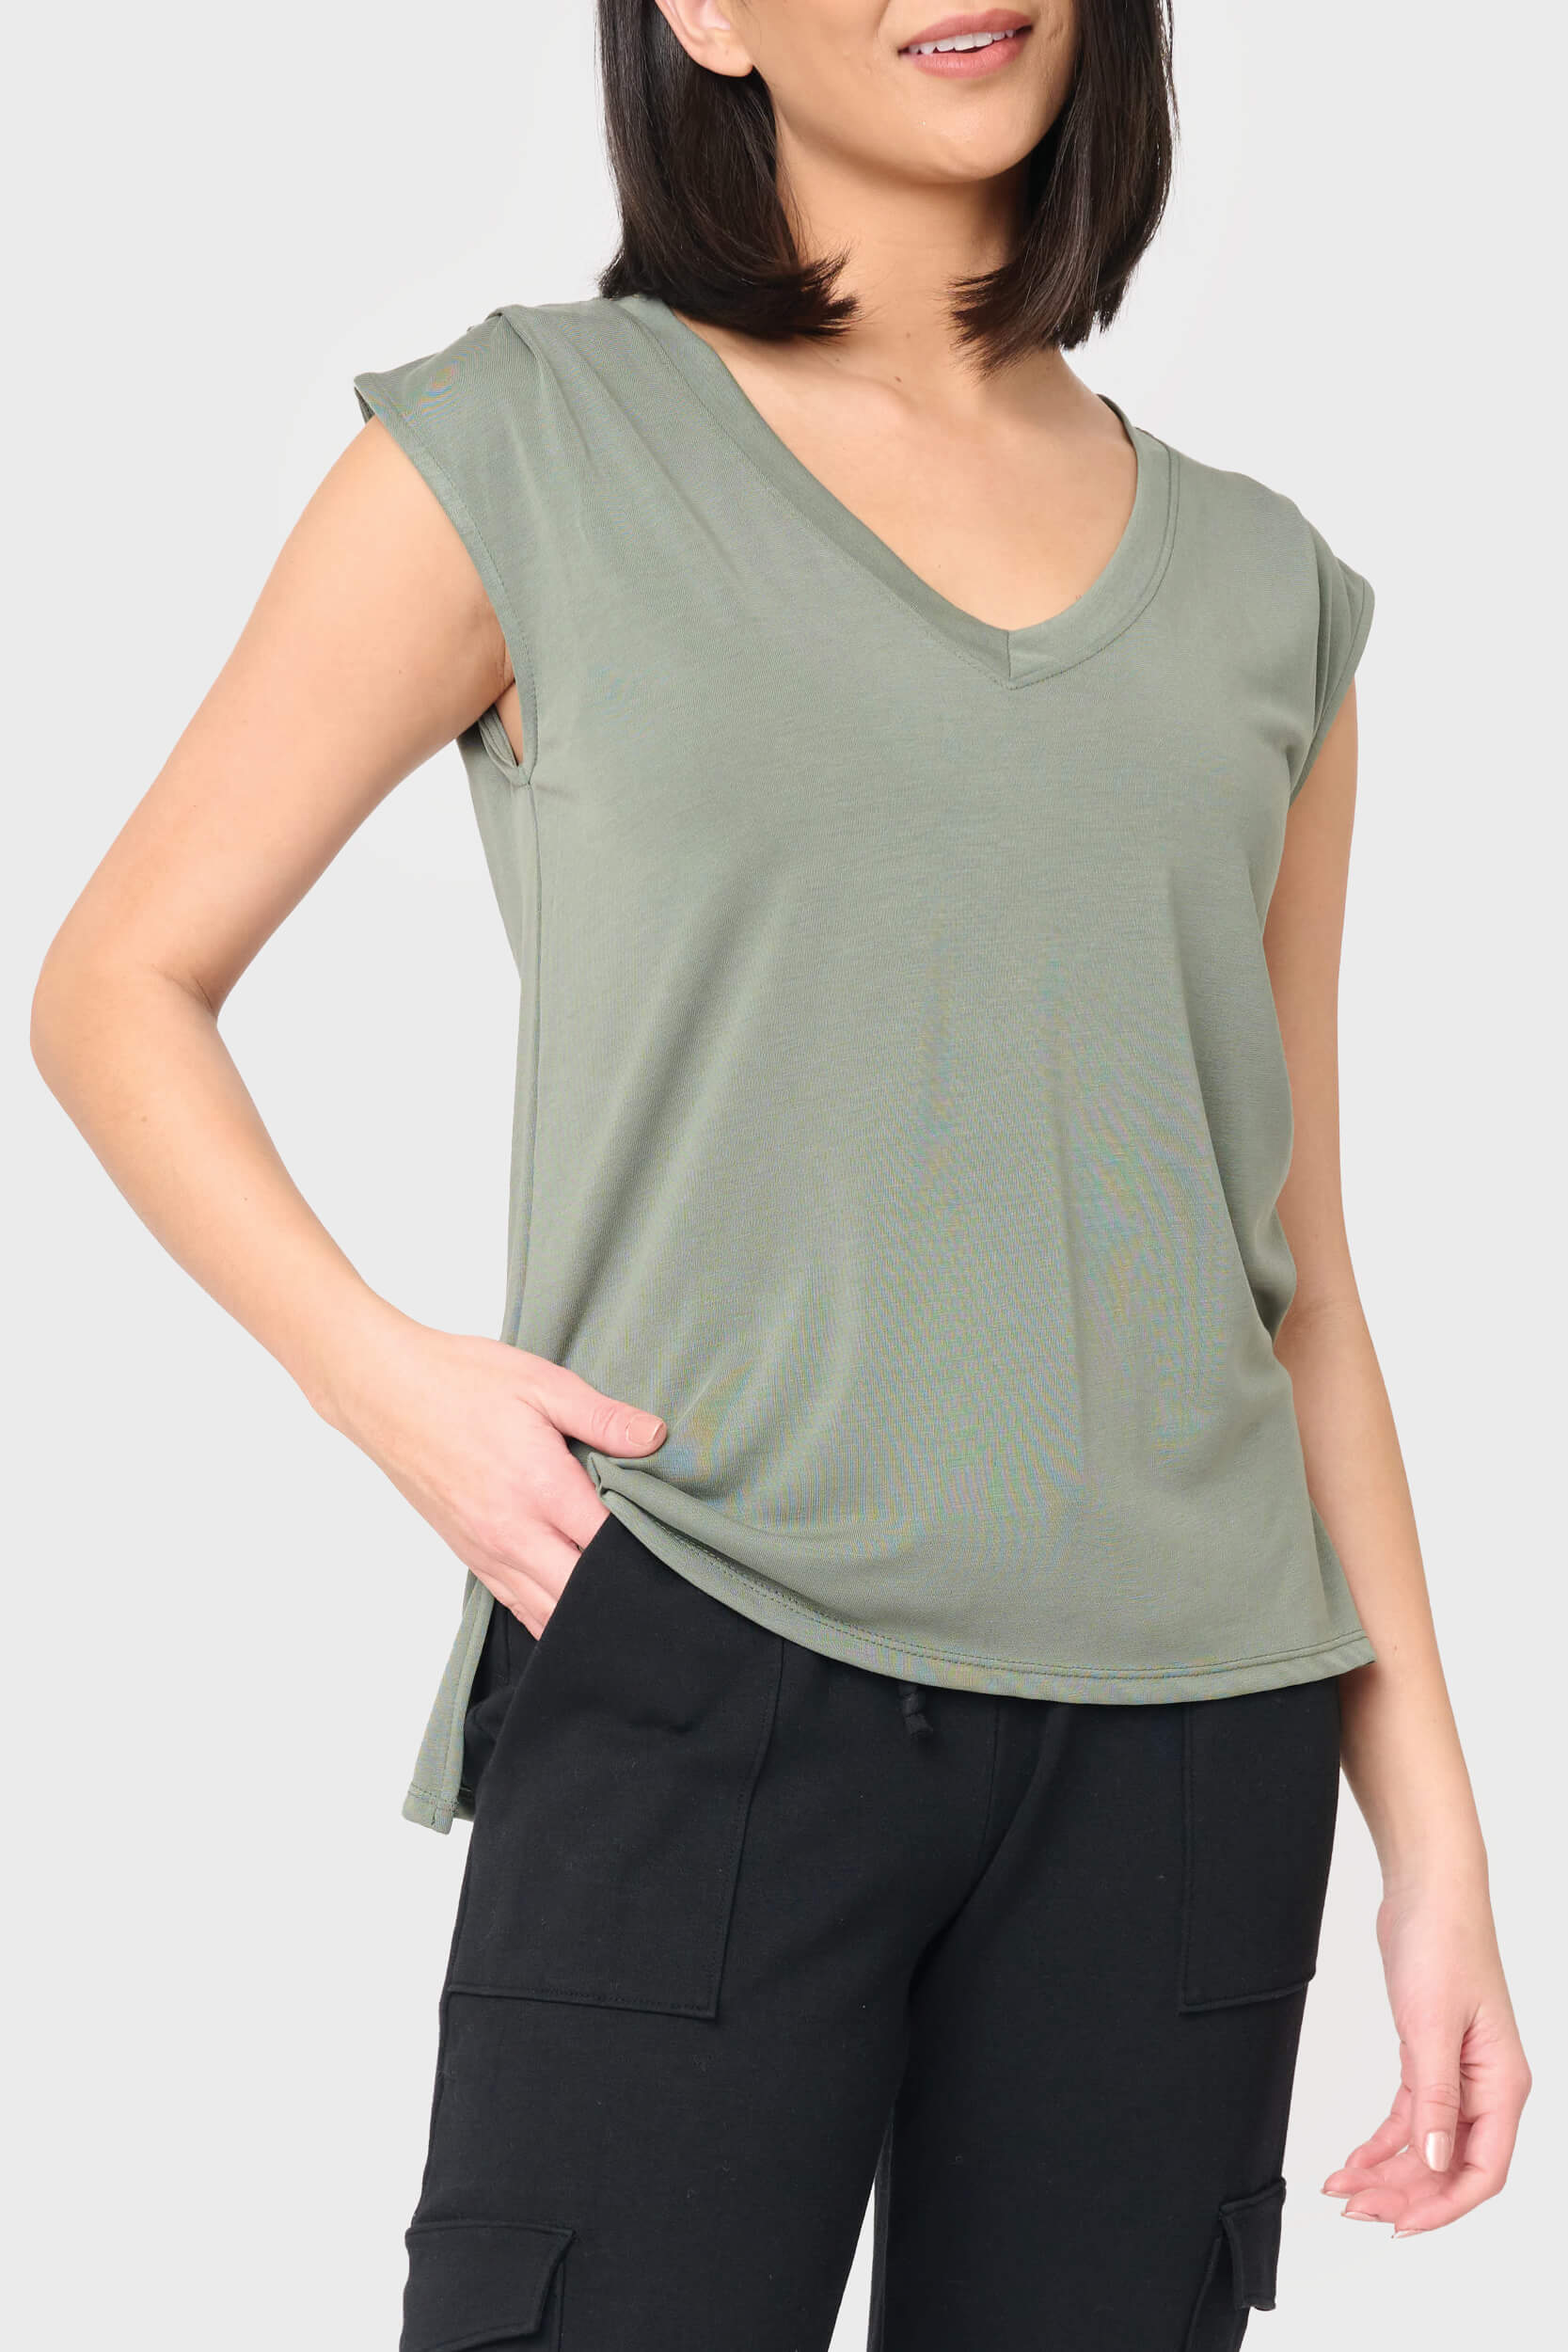 The Favorite Luxe Essentials V-Neck Tee - Military Green / XS